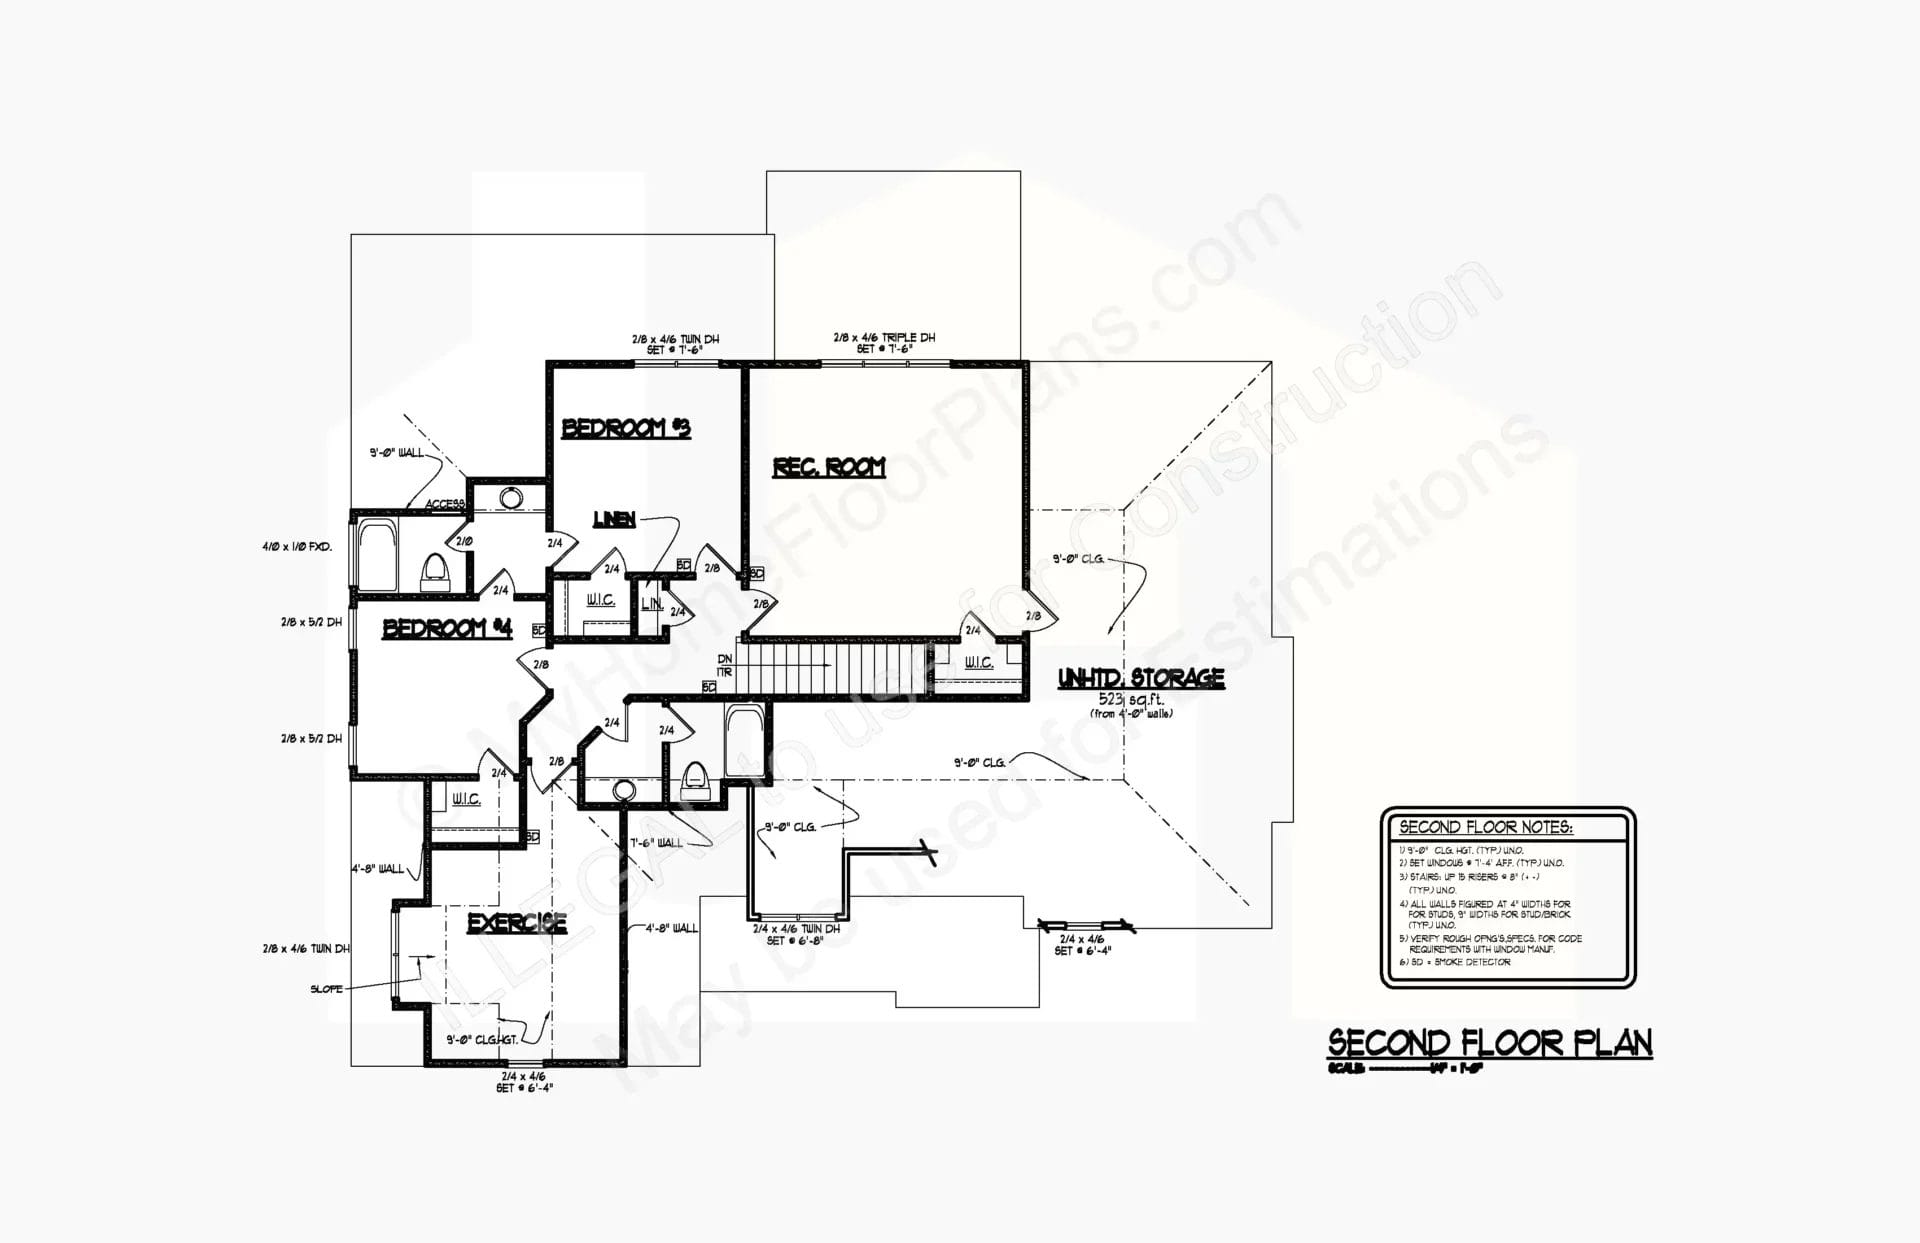 This image illustrates a comprehensive architectural blueprint of a second-floor home plan, showing layout markings for bedrooms, bathrooms, stairs, and storage areas, along with measurements and design notes for 13-1214.